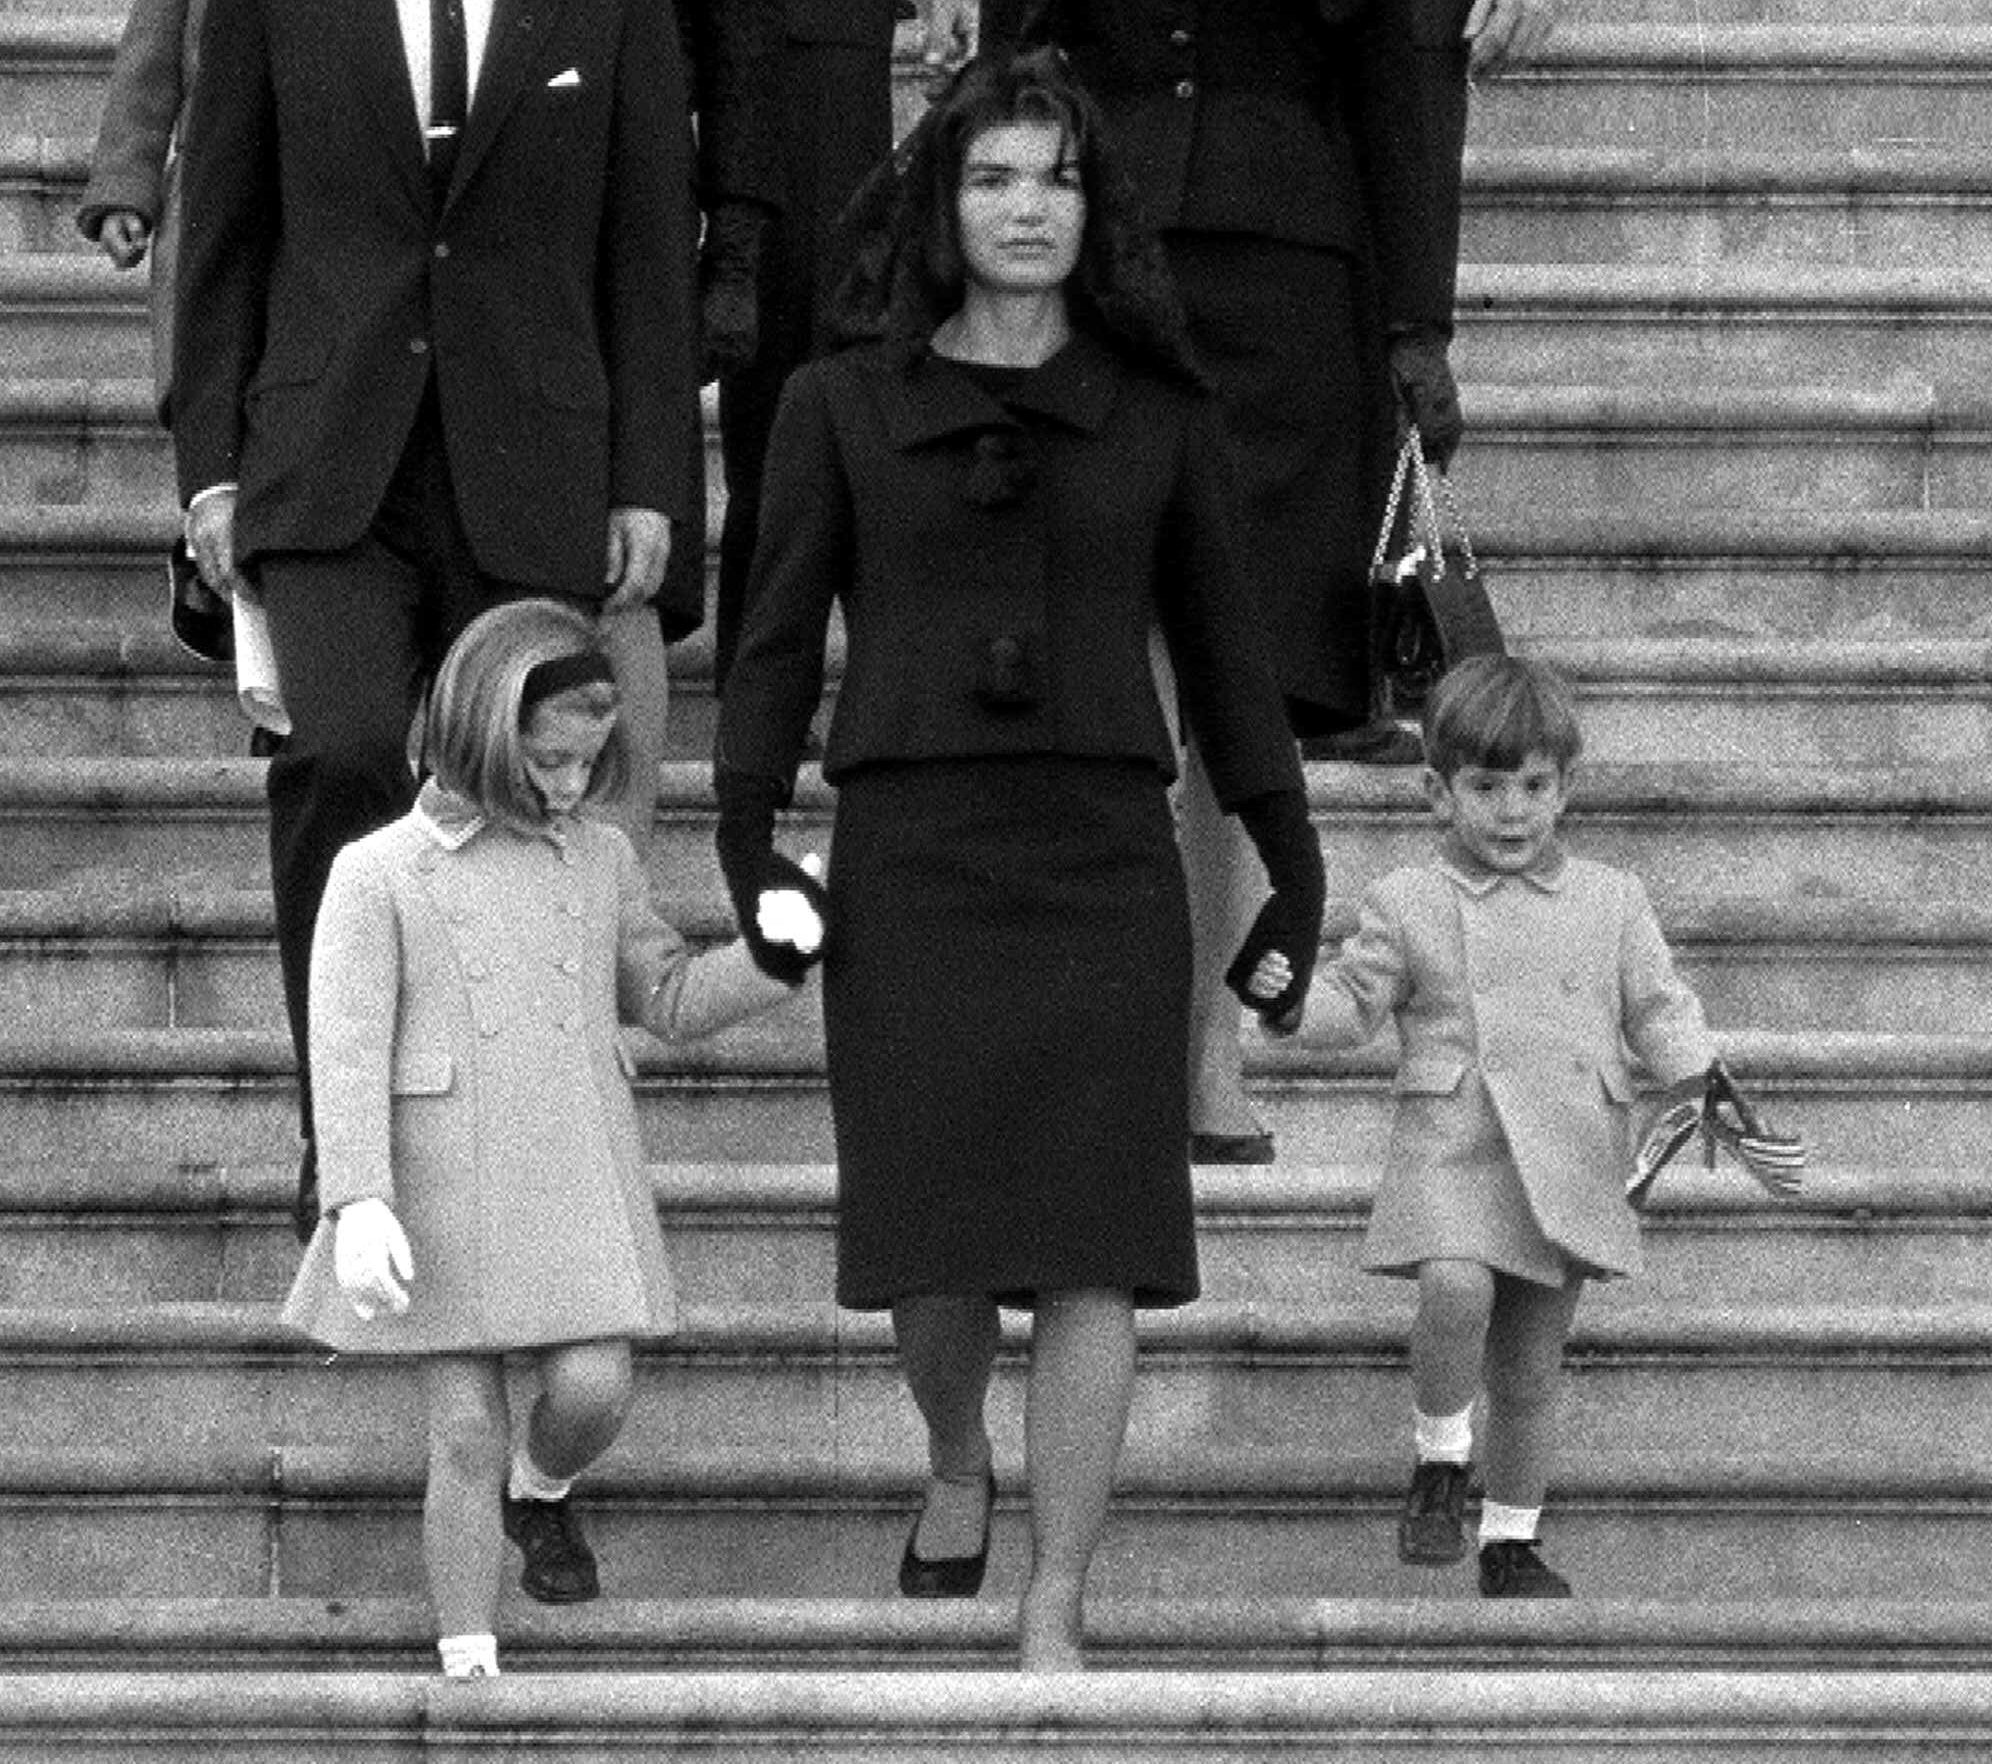 File - In this Nov. 24, 1963 file photo, Jacqueline Kennedy walks down the Capitol steps with her daughter Caroline and son John Jr. after President John. F. Kennedy's casket was placed in the rotunda in Washington Nov. 24, 1963. (AP Photo, File)